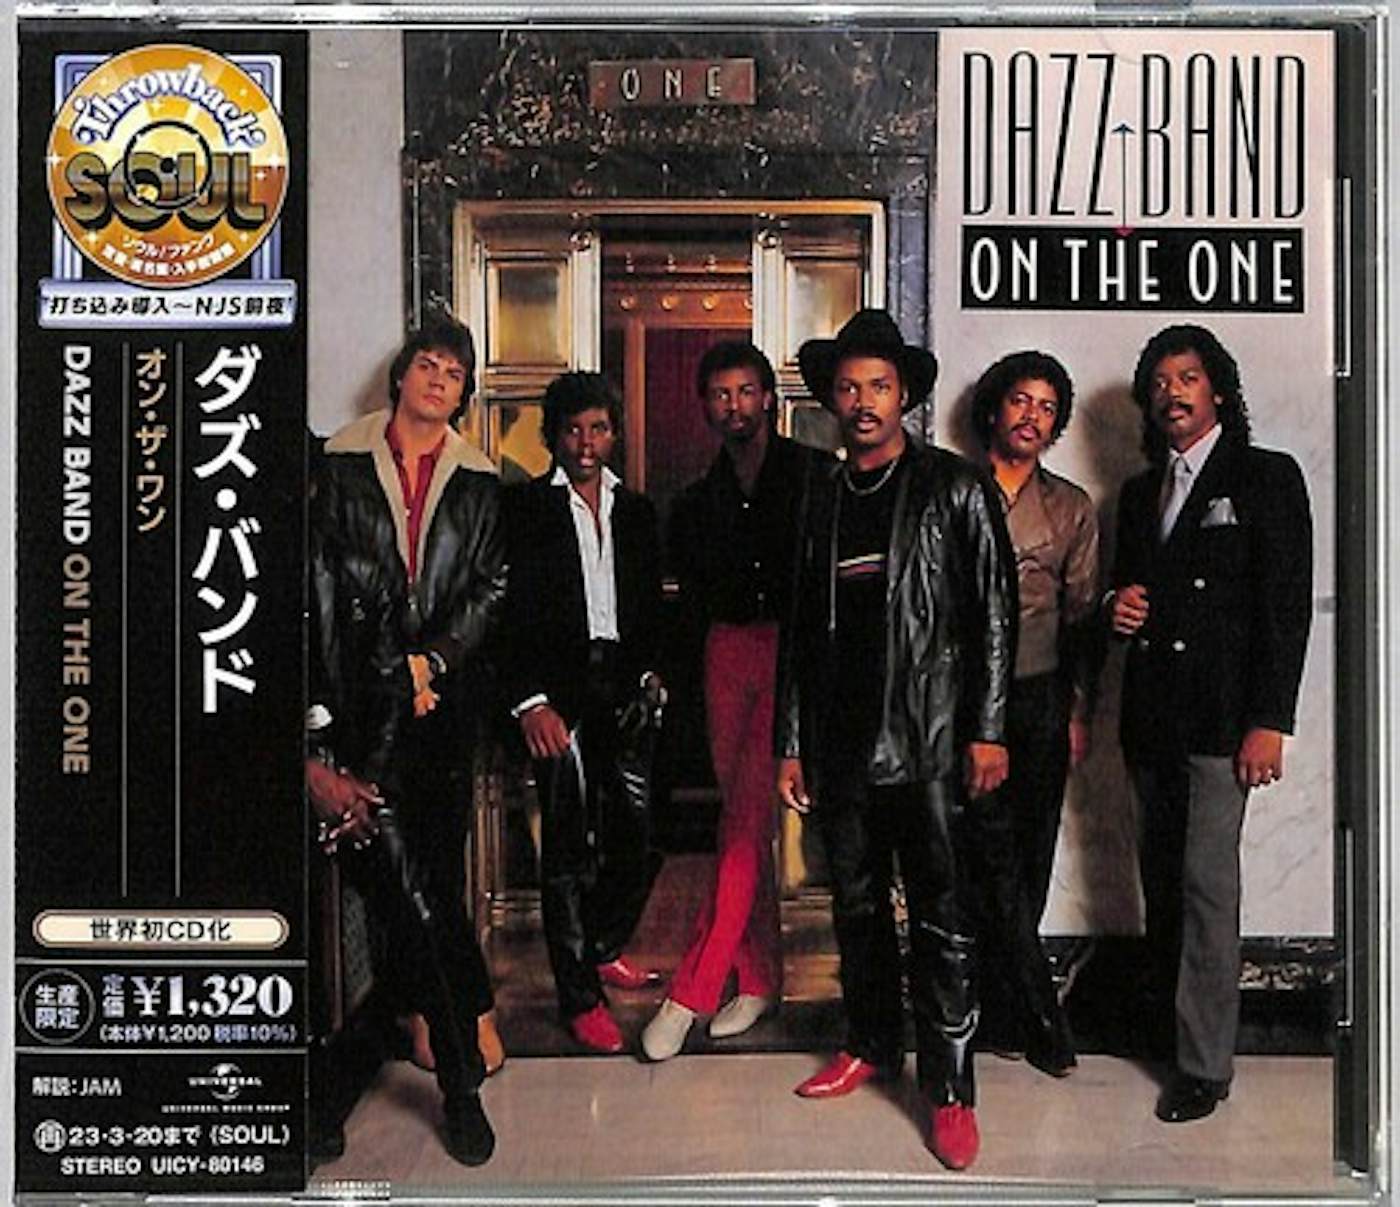 Dazz Band ON THE ONE CD